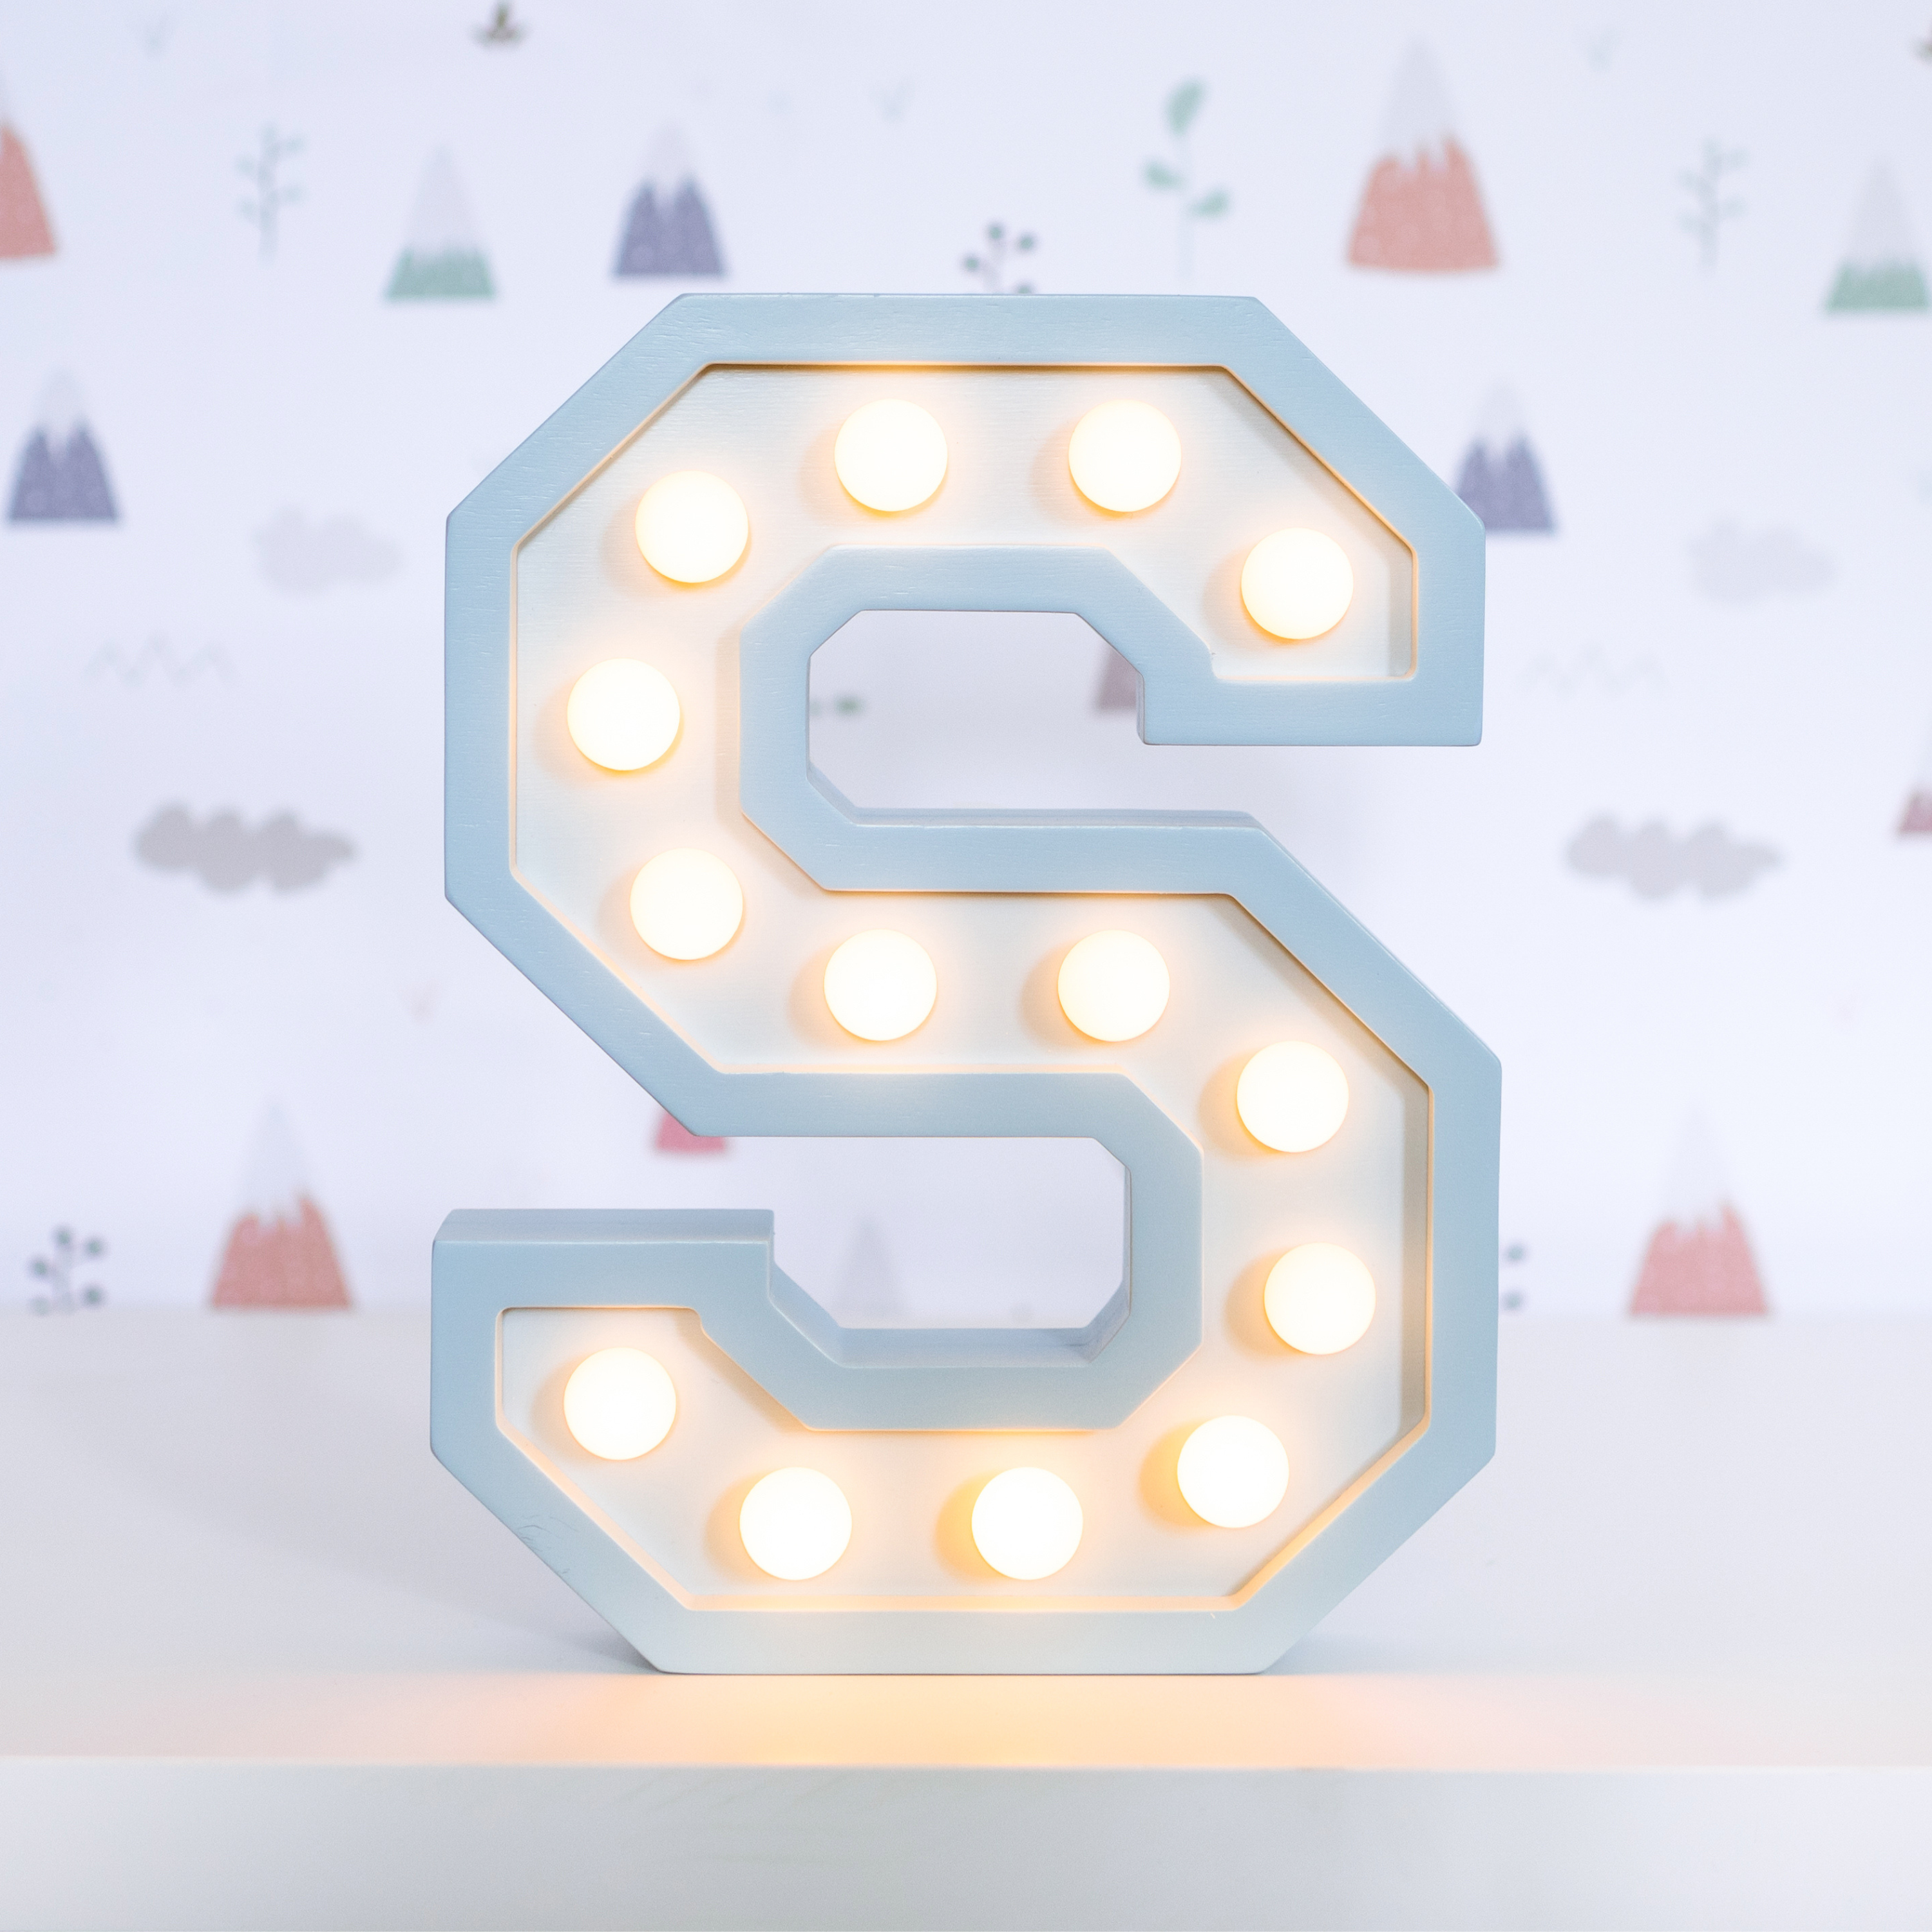 MARQUEE LETTERS  - LIGHT BLUE